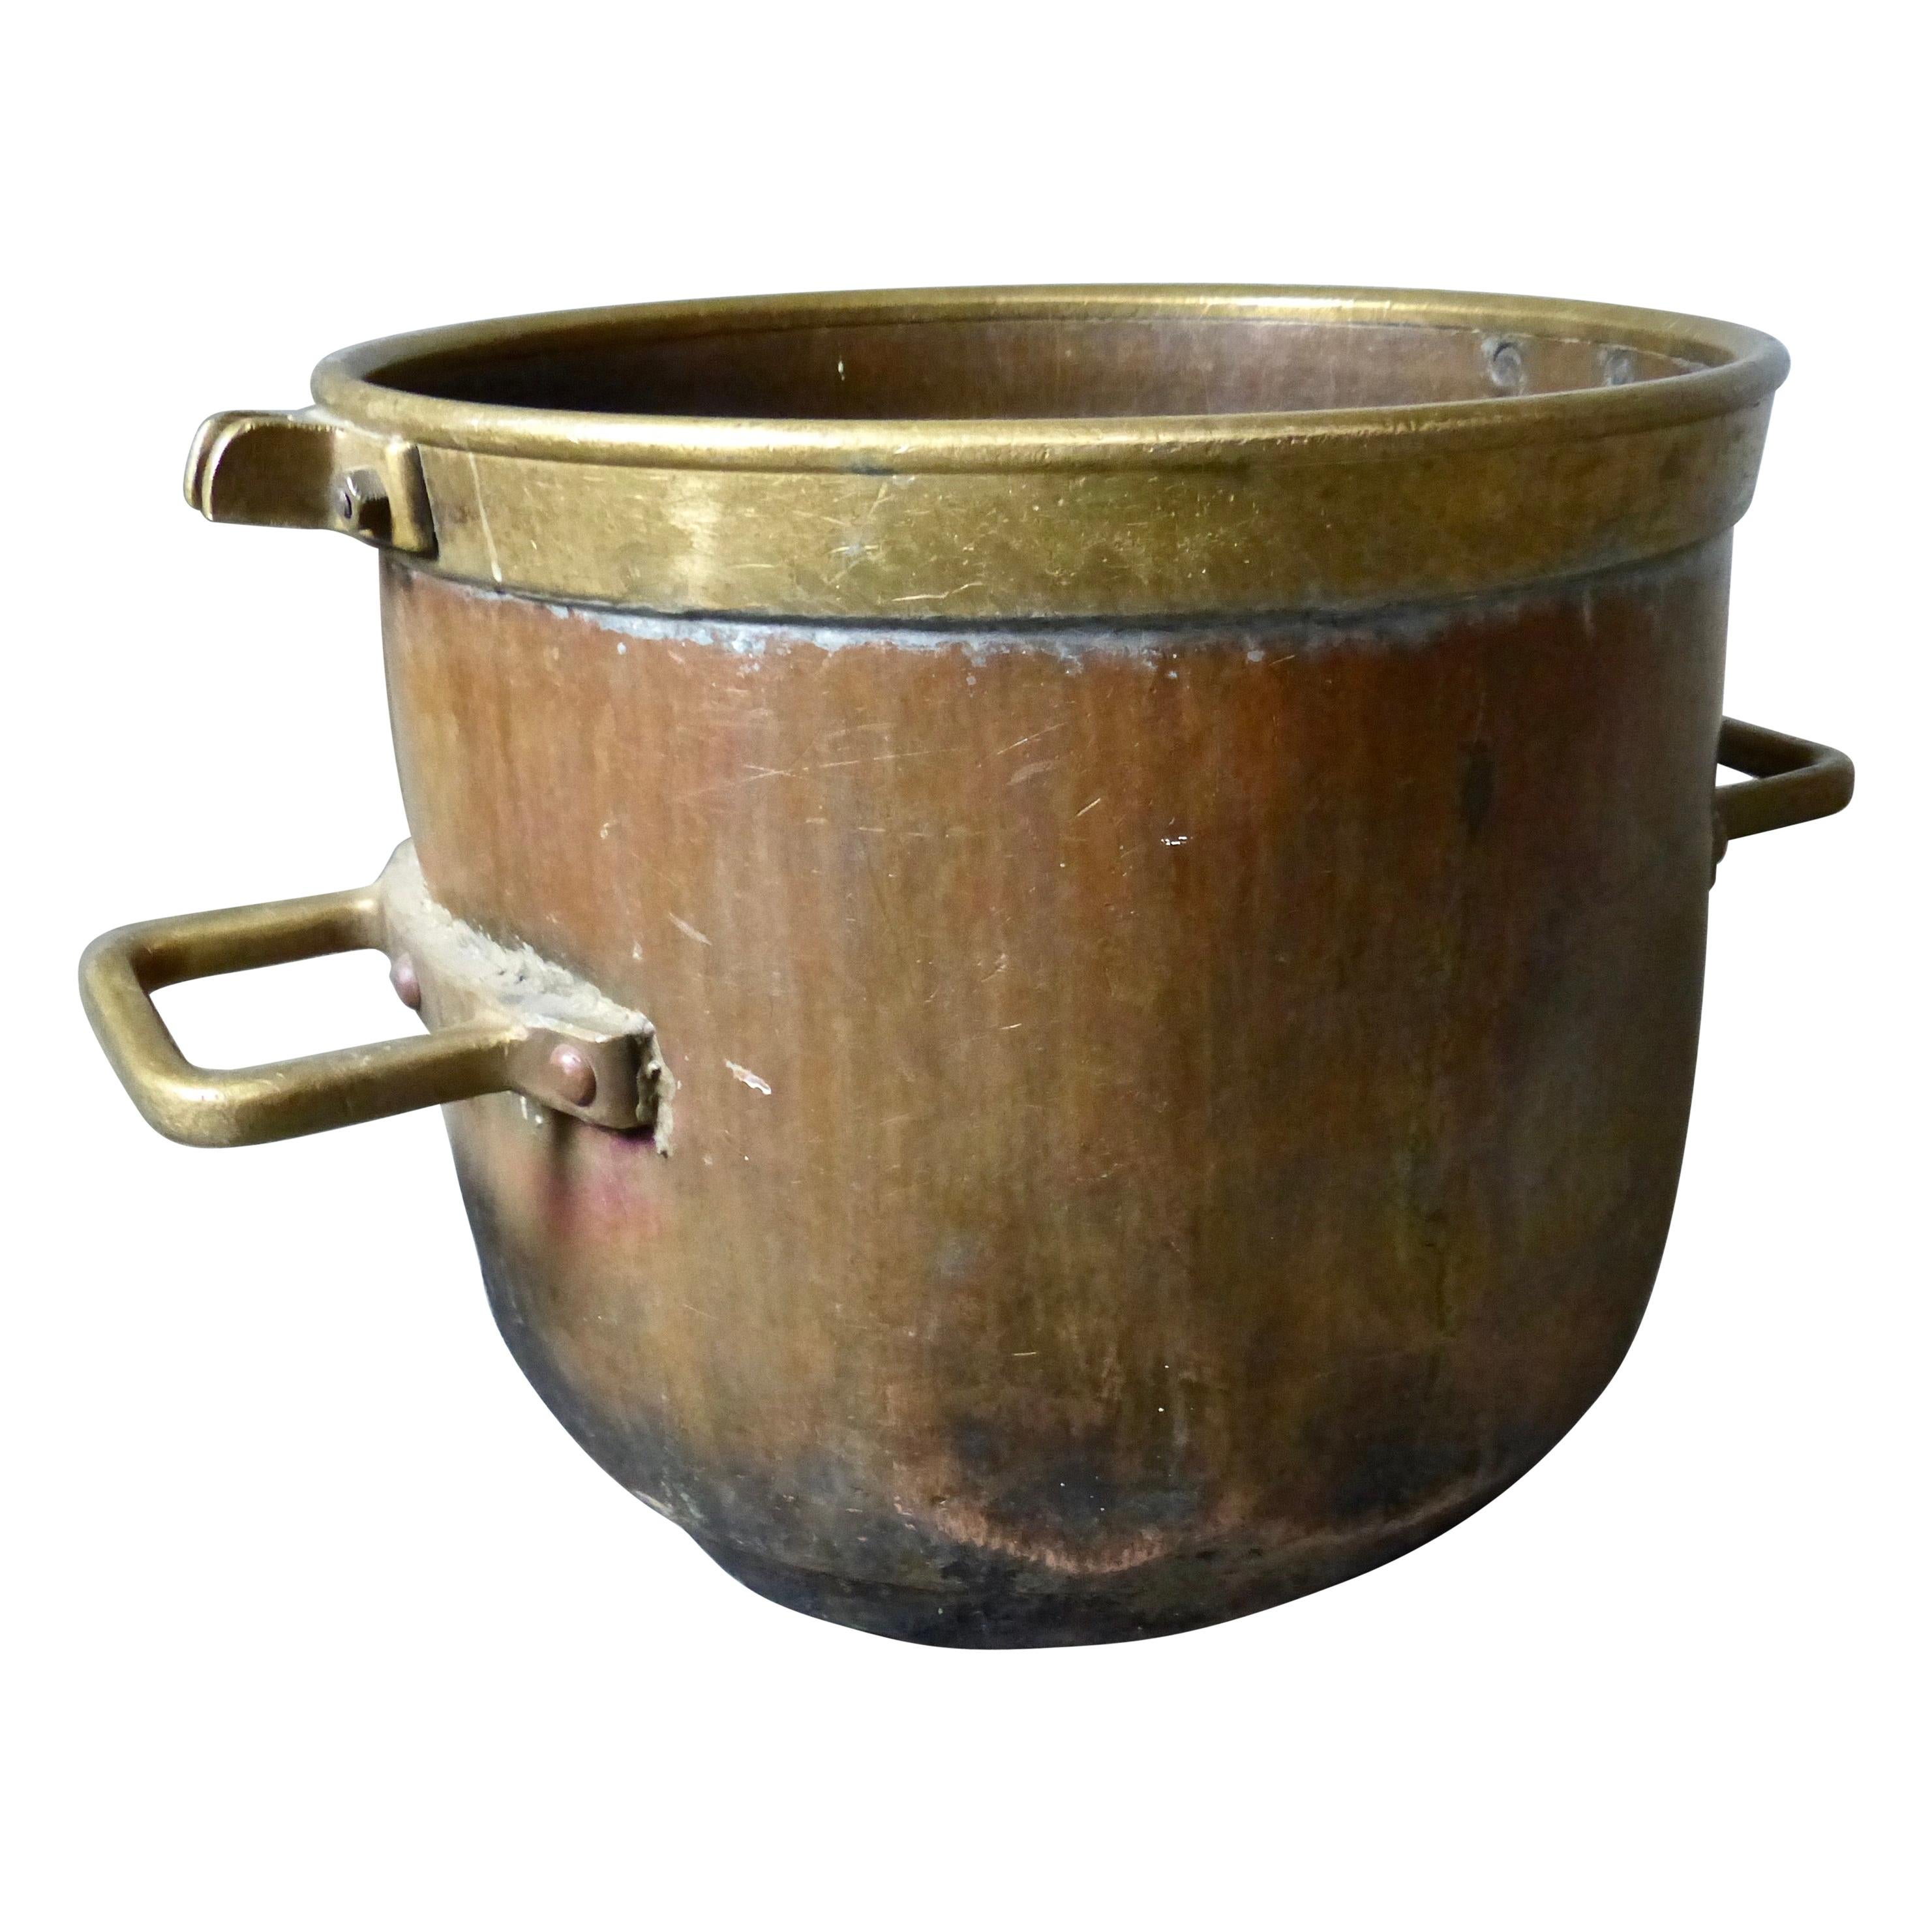 French Copper Pot/Cauldron with Brass Accents, circa 1880